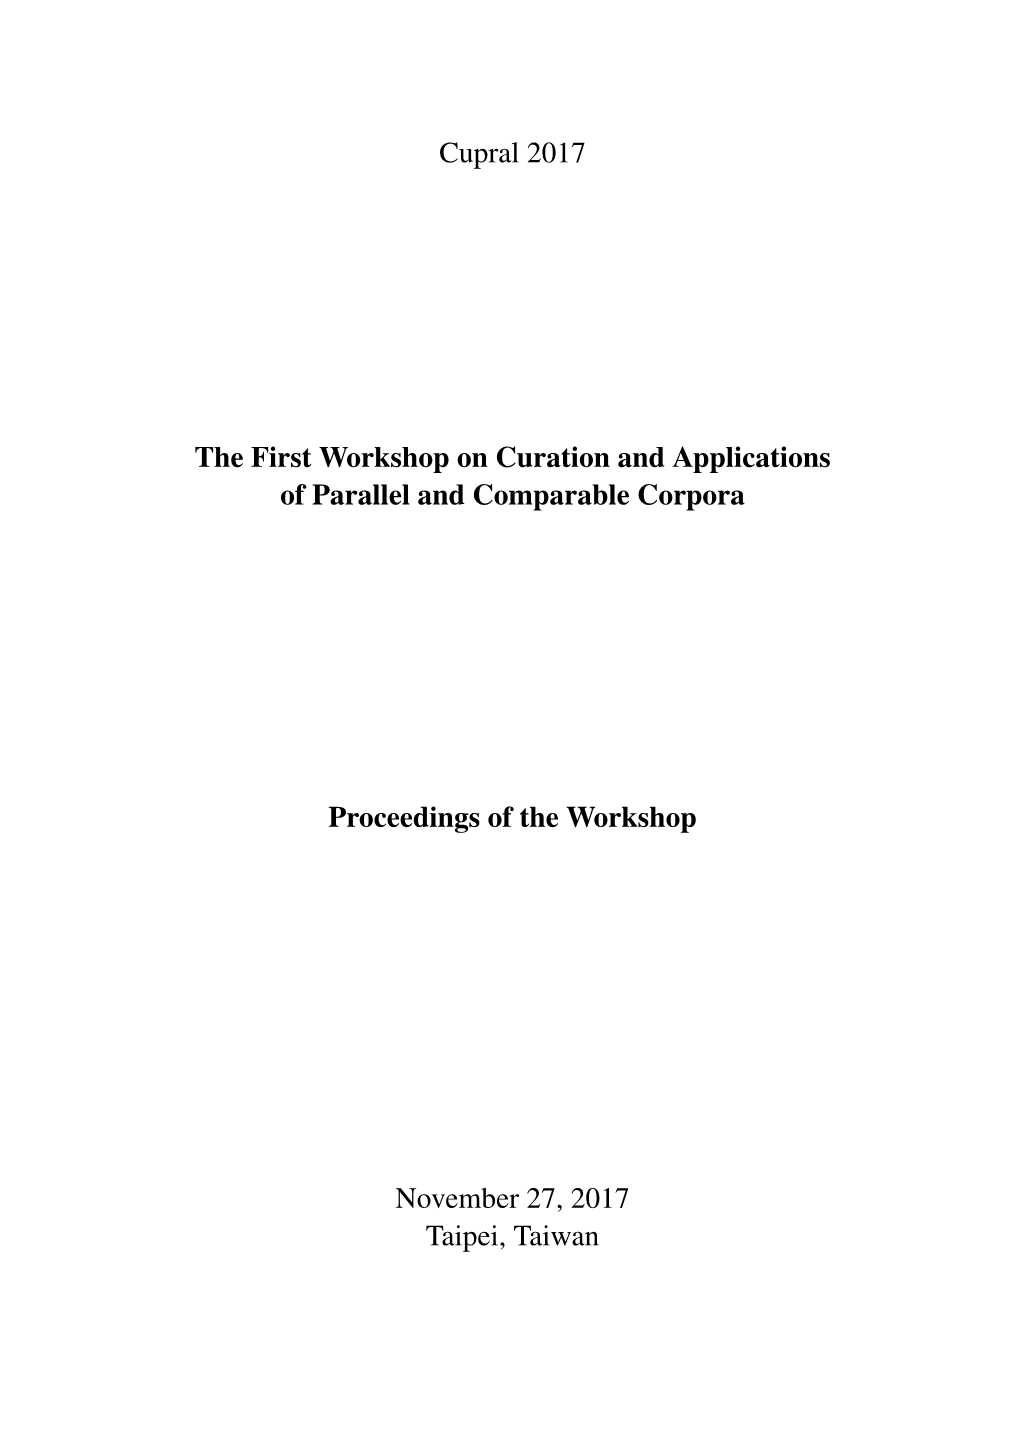 Proceedings of the Workshop on Curation and Applications of Parallel and Comparable Corpora, Pages 1–10, Taipei, Taiwan, November 27–December 1, 2017